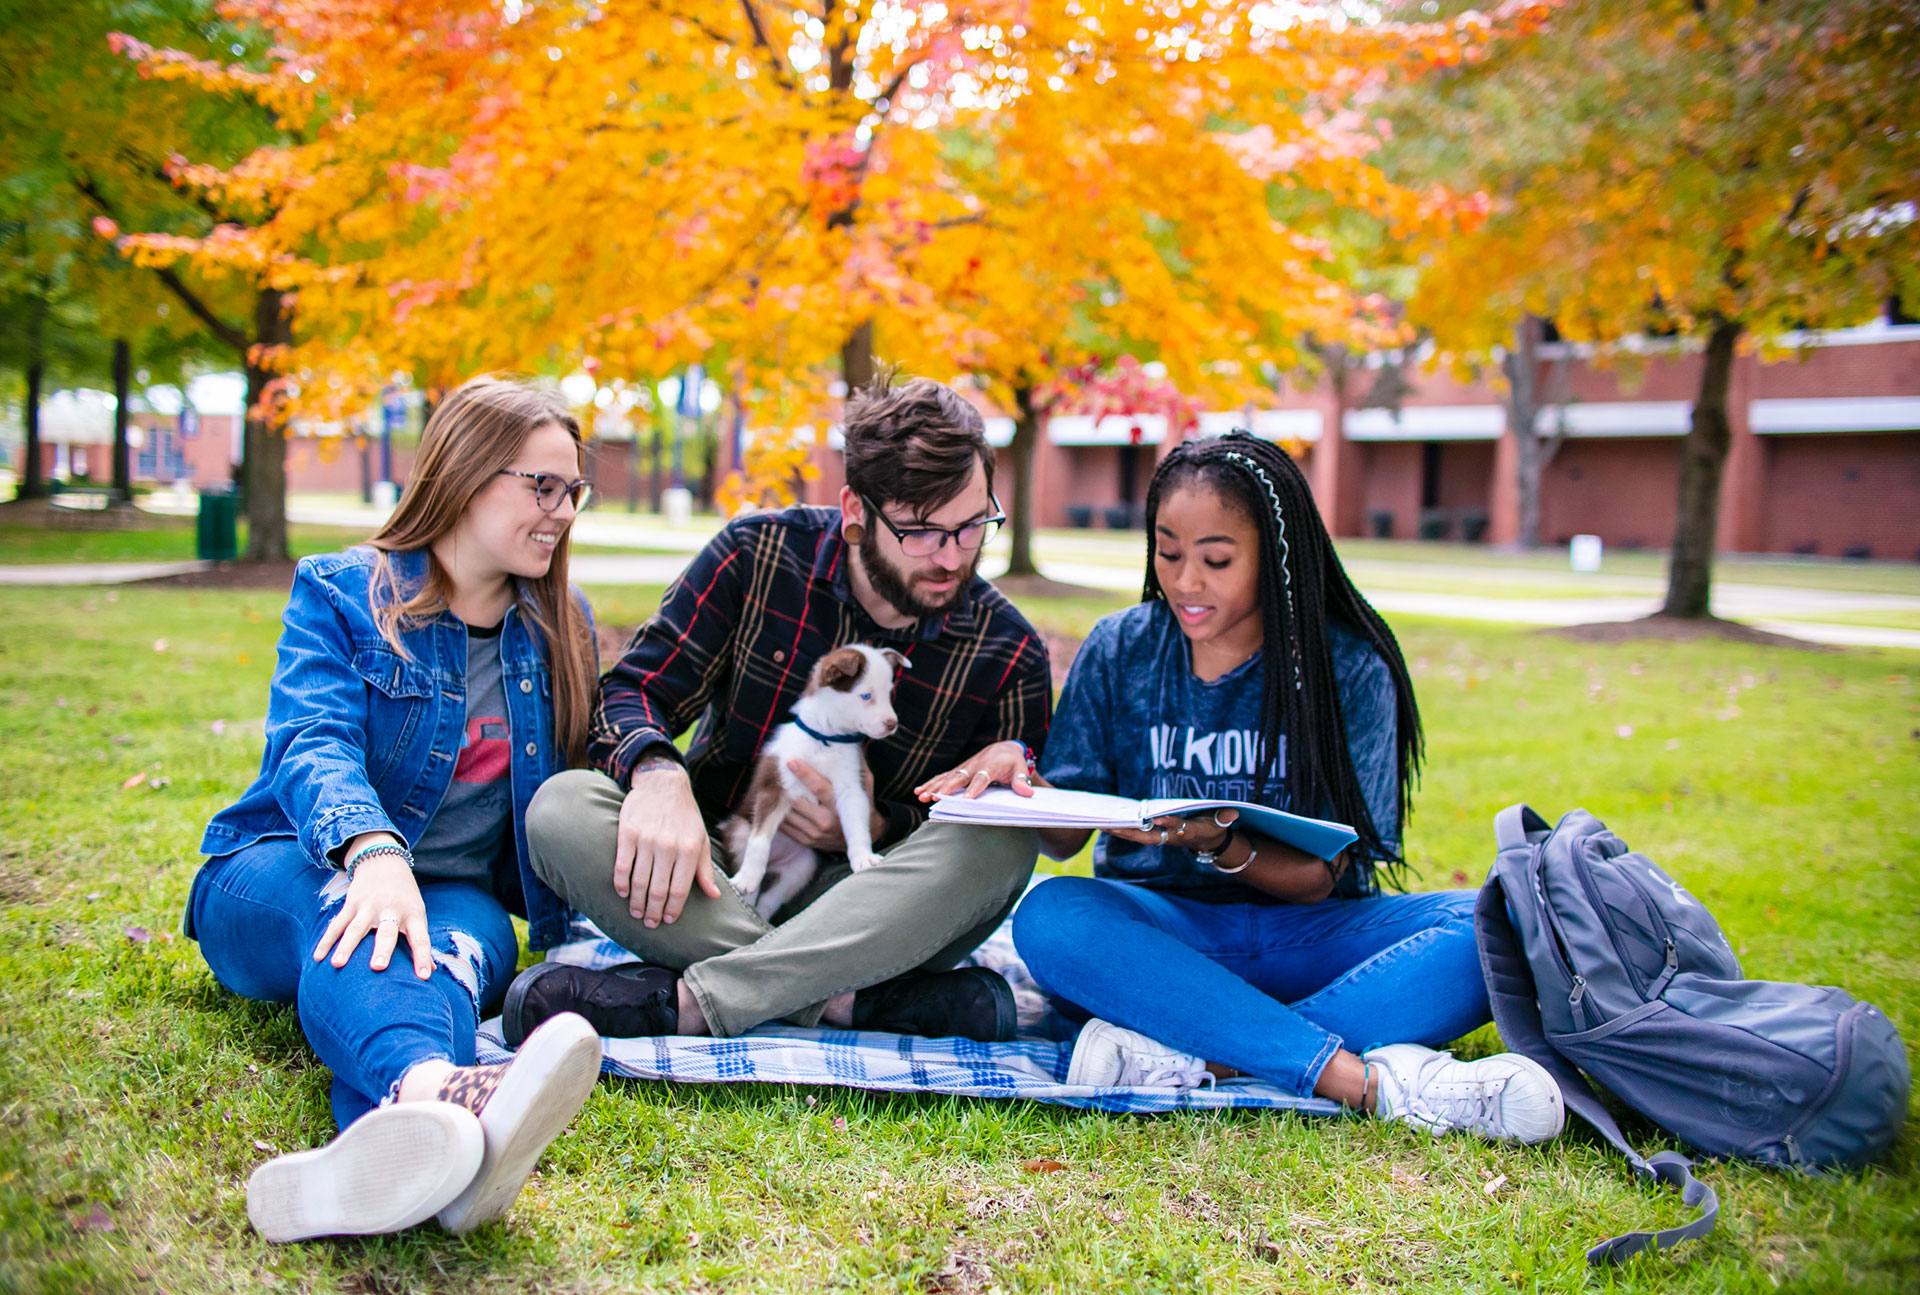 Students study on the campus green under fall trees